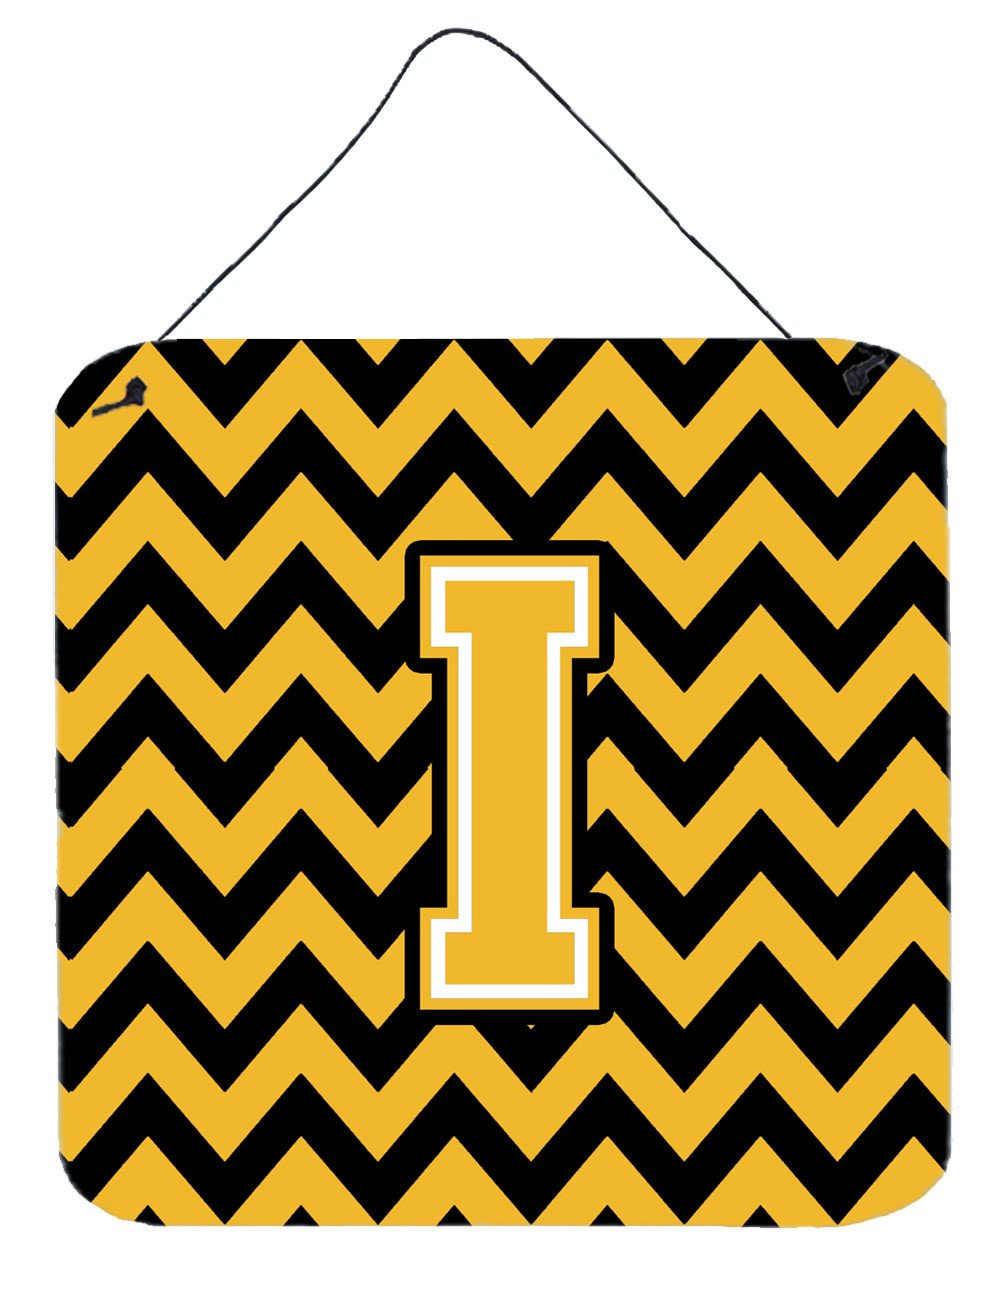 Letter I Chevron Black and Gold Wall or Door Hanging Prints CJ1053-IDS66 by Caroline's Treasures